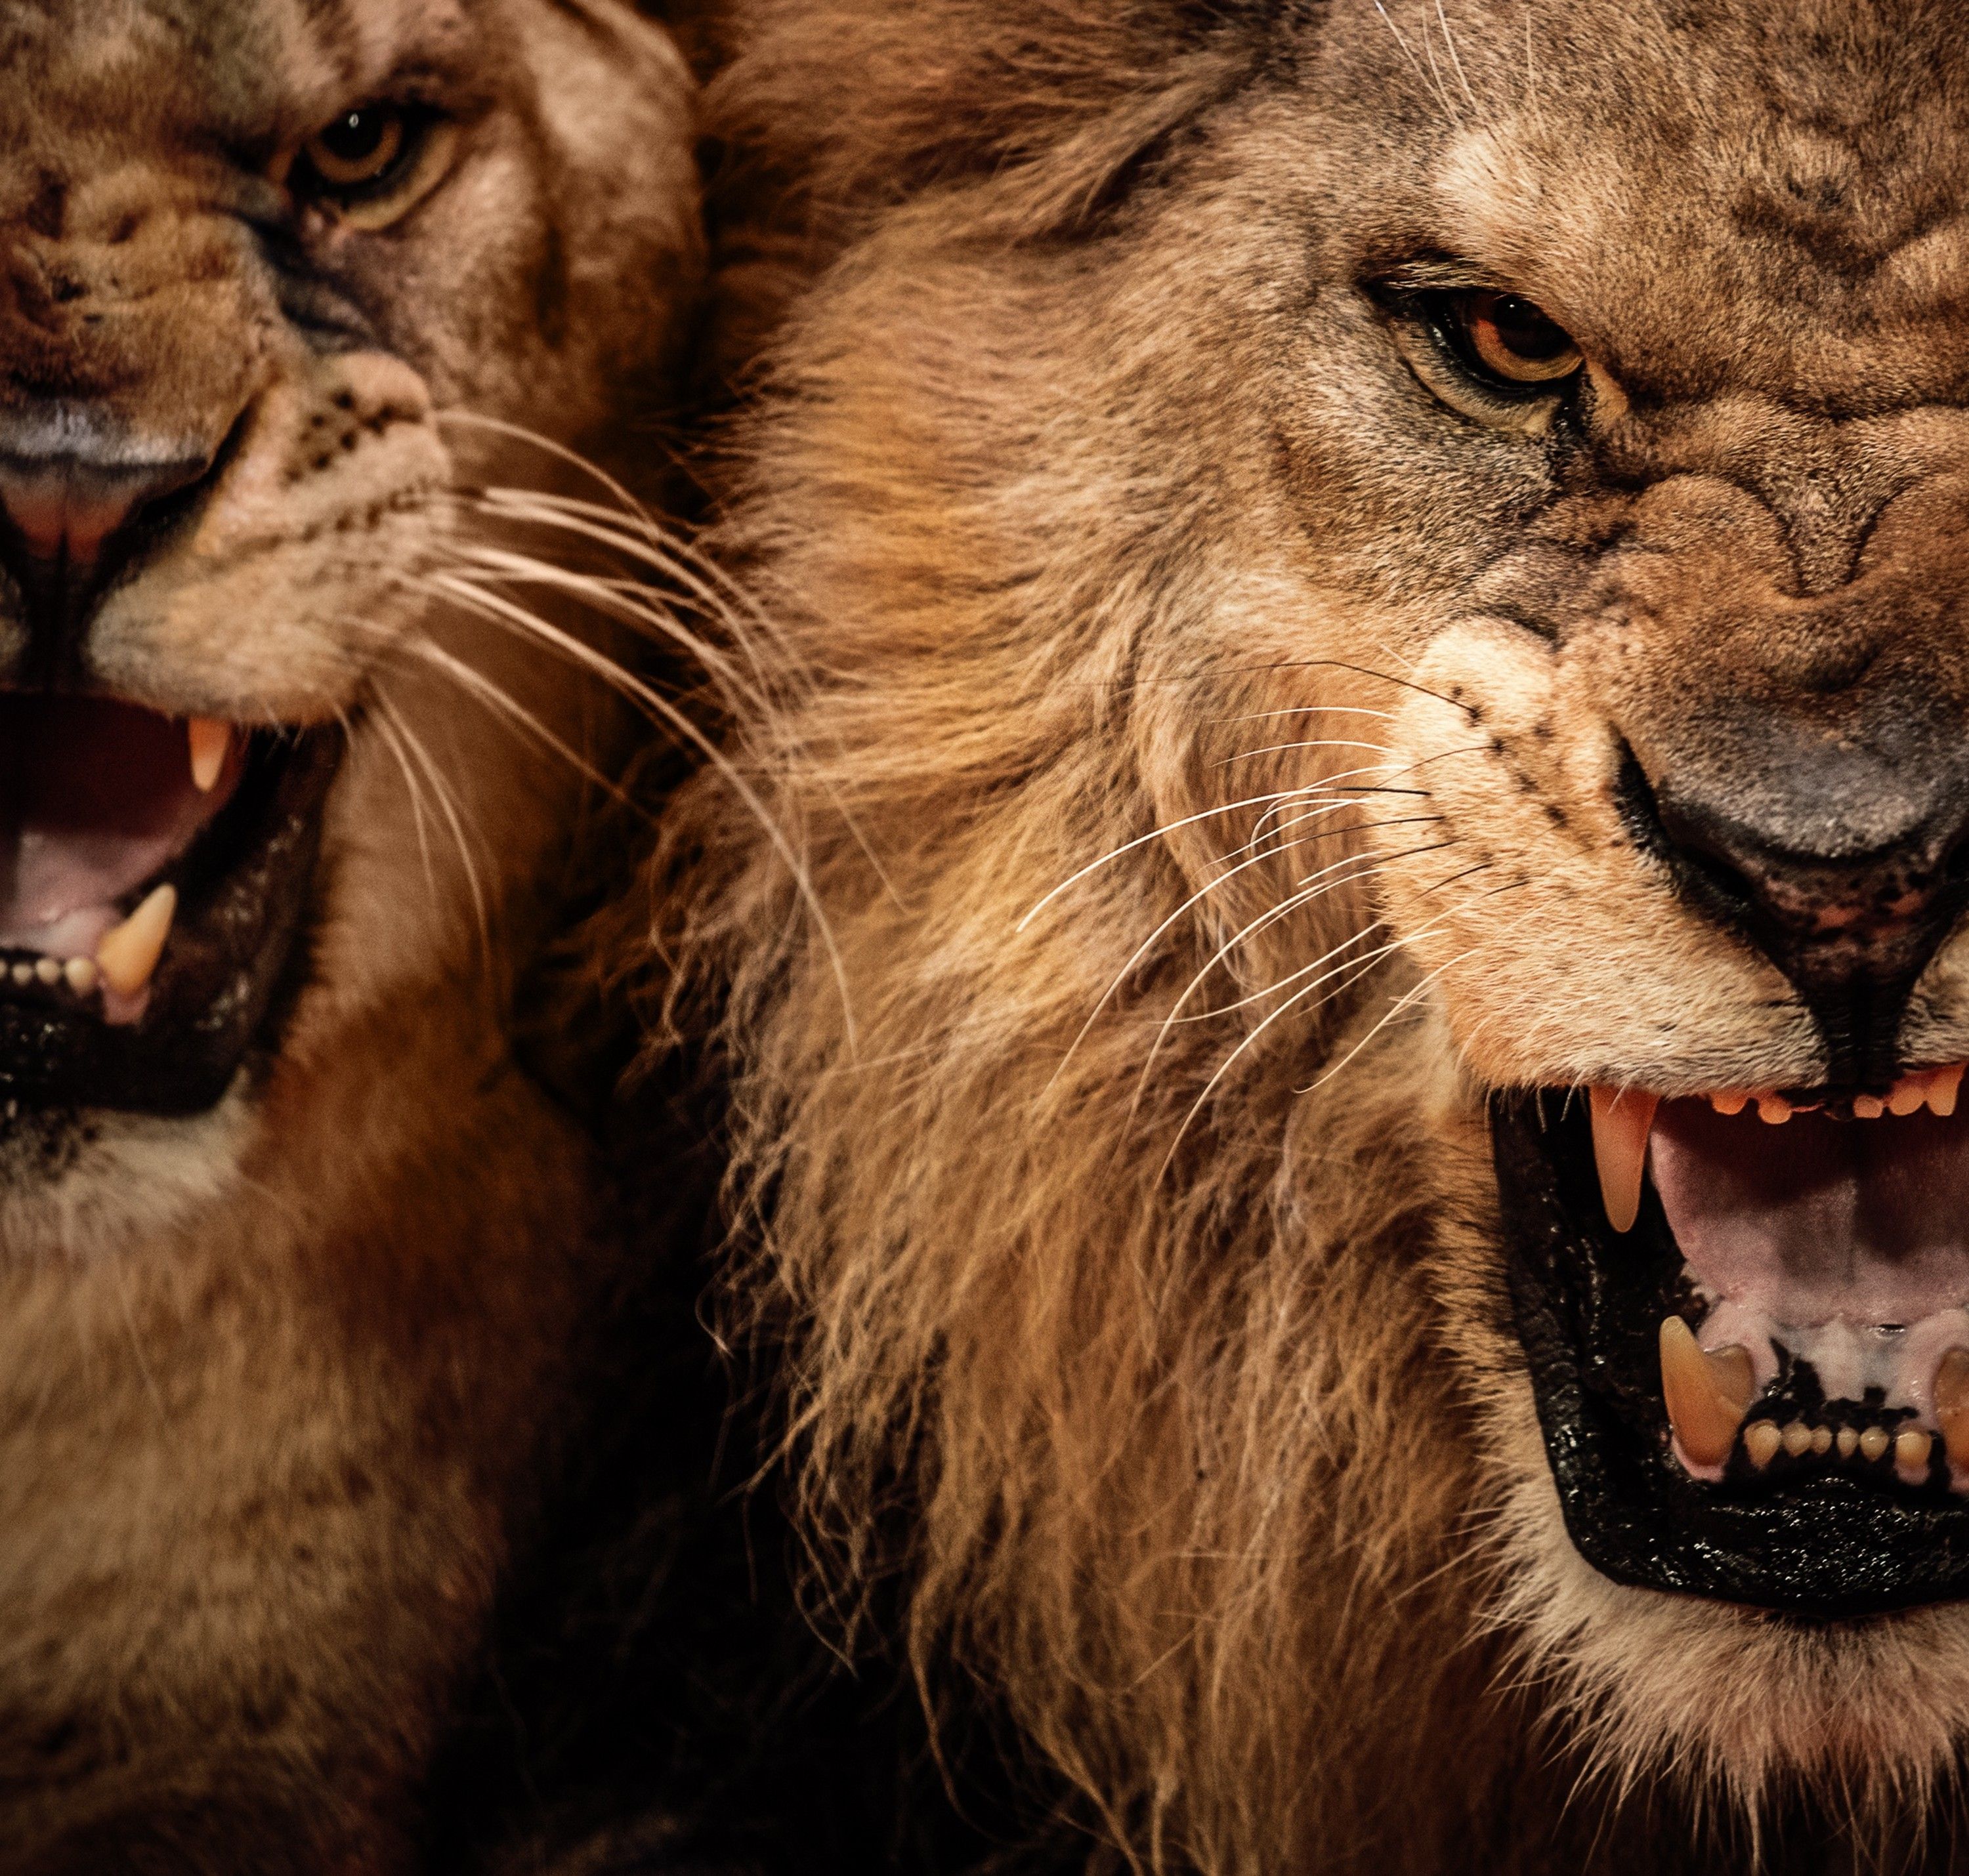 Angry Lions Wallpaper, Gallery of 47 Angry Lions Background